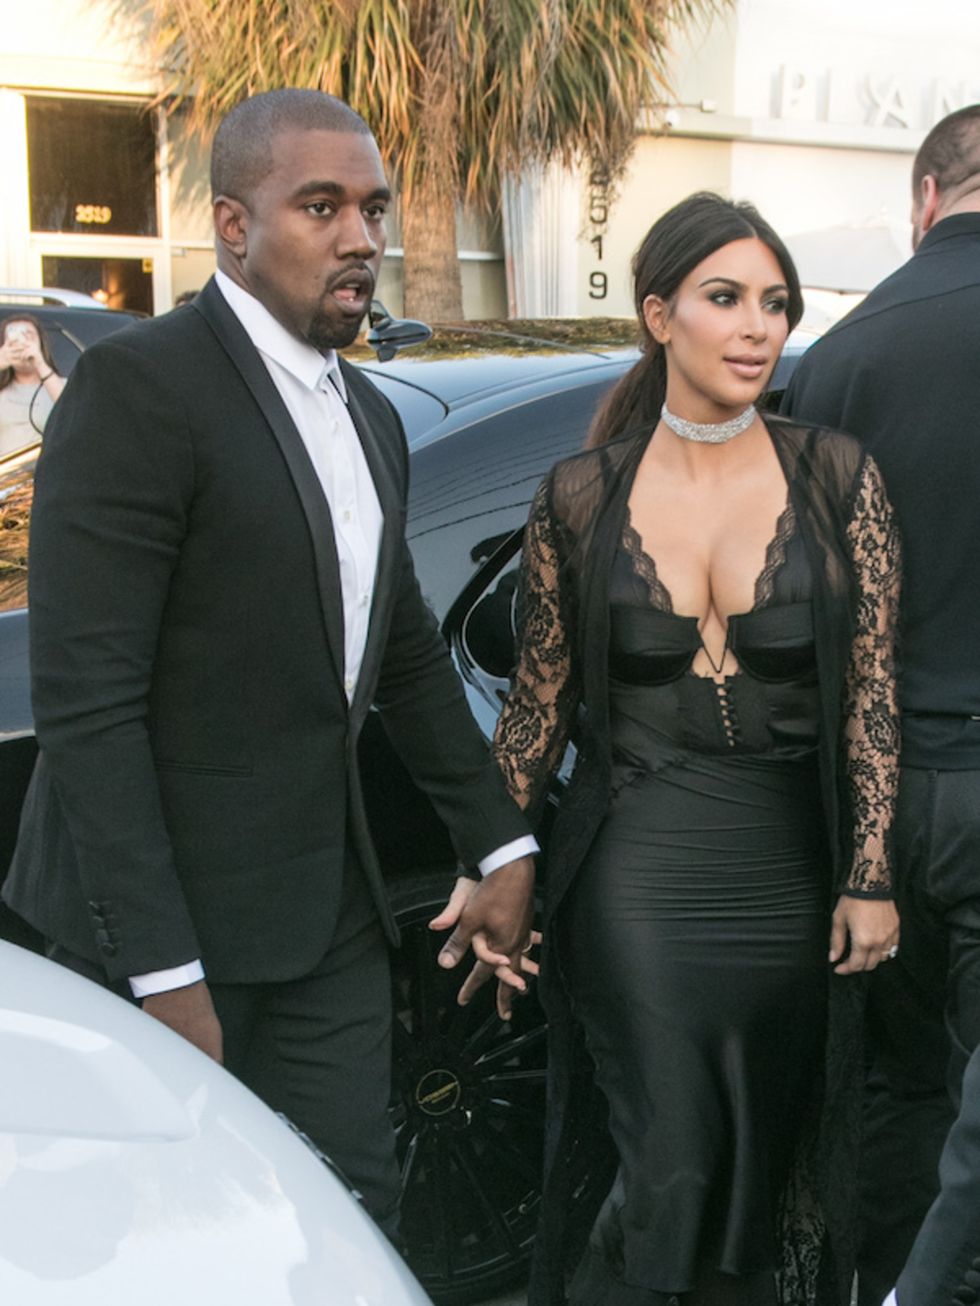 <p><strong>Kim Kardashian </strong></p>

<p>Kim Kardashian and Kanye West are no strangers to lavish gifts, but Kanye&rsquo;s most recent push present to Kim may be his most extravagant yet. After giving birth to Saint, Kanye gifted Kim with a $1 million 